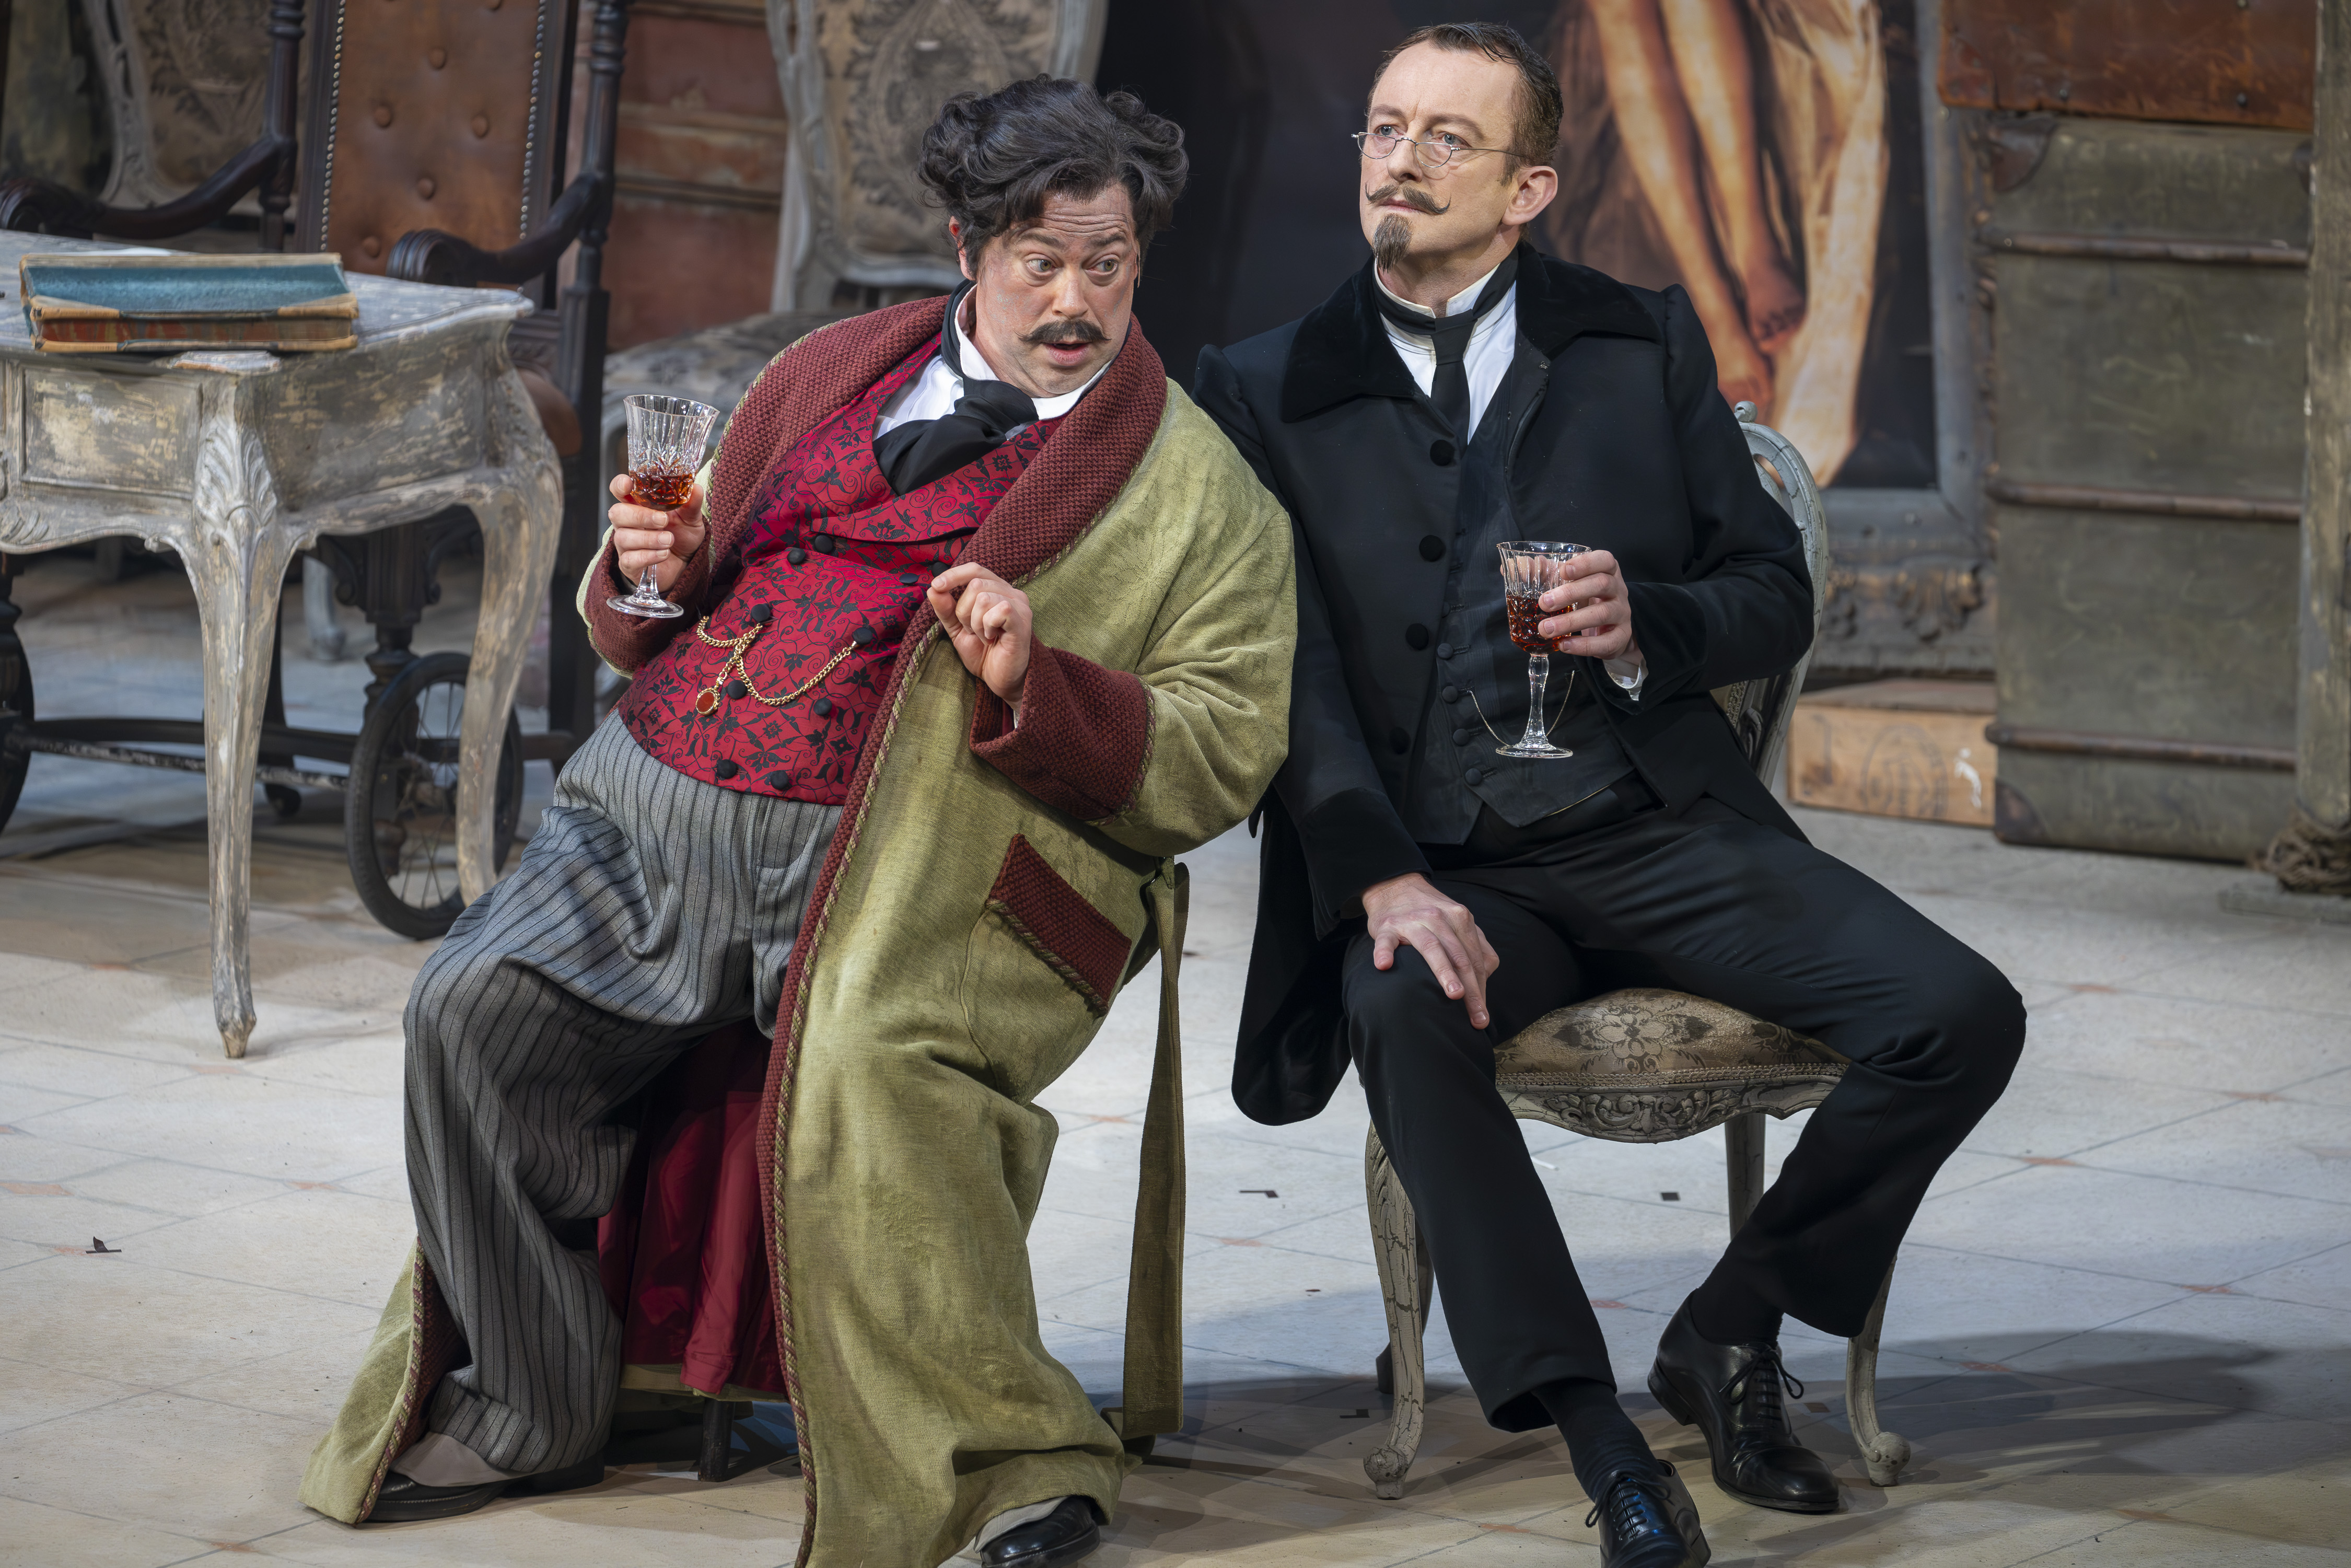 David Stout (Doctor Bartolo) And John Molloy (Don Basilio) In The Barber Of Seville. Credit James Glossop.